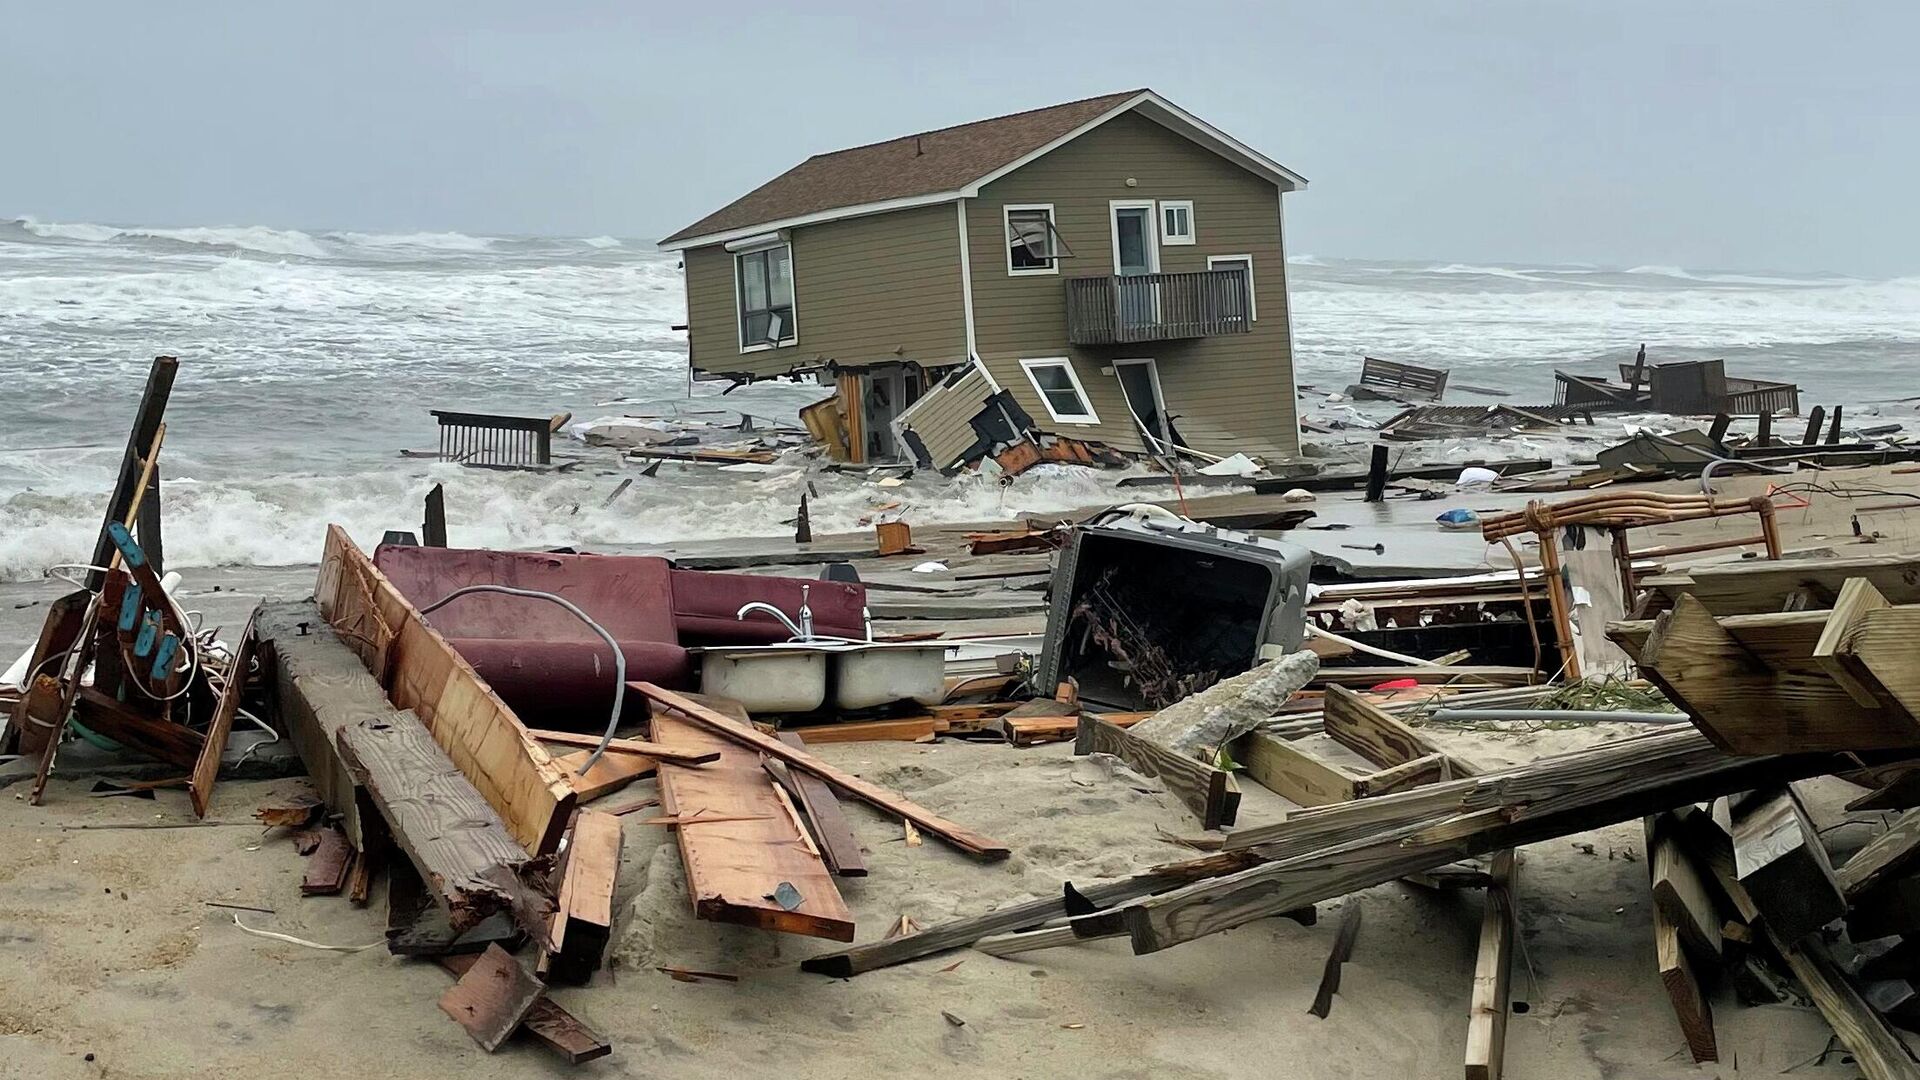 In this image provided by National Park Service, a beach house that collapsed along North Carolina's Outer Banks rest in the water on Tuesday, May 10, 2022, in Rodanthe, N.C. The home was located along Ocean Drive in the Outer Banks community of Rodanthe. The park service has closed off the area and warned that additional homes in the area may fall too.  - Sputnik International, 1920, 11.05.2022